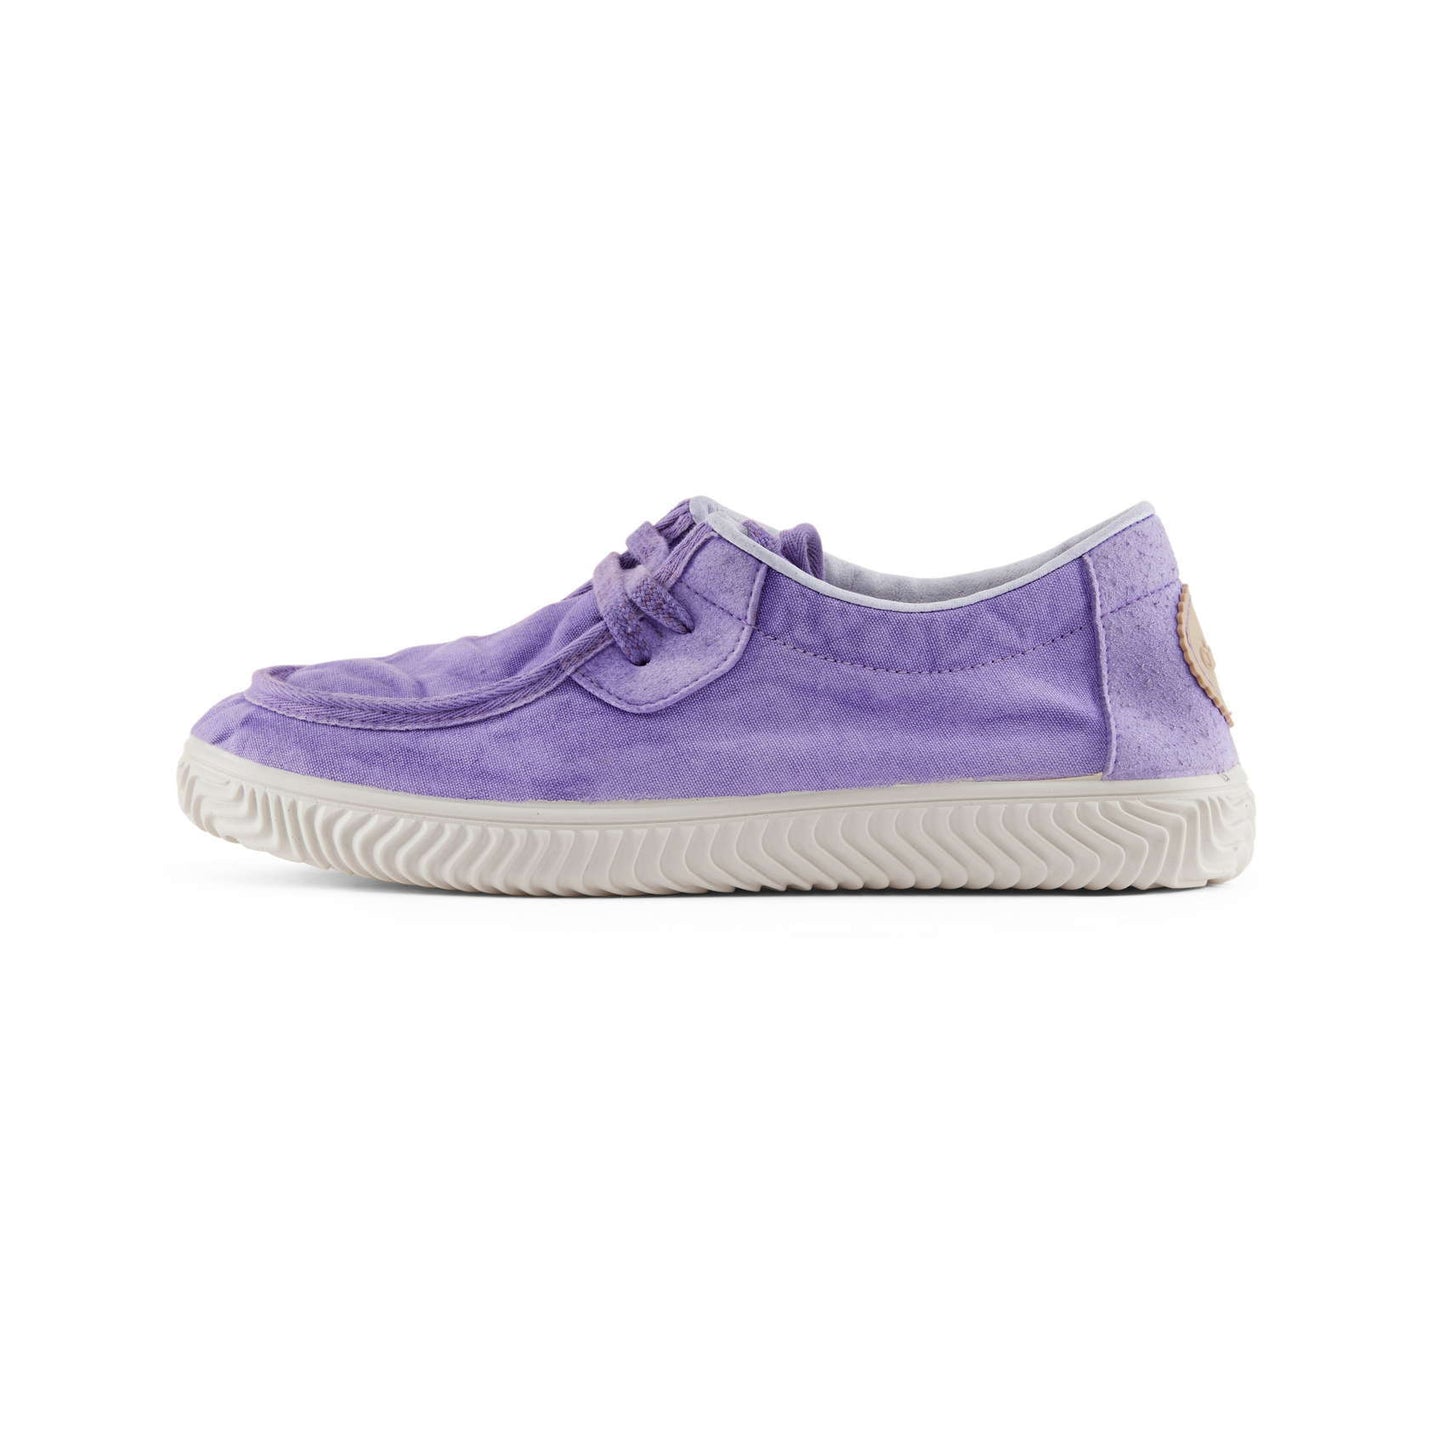 DUUO | BASKETS POUR FEMMES | ONA WALABY WASHED 050 VIOLET 78) |